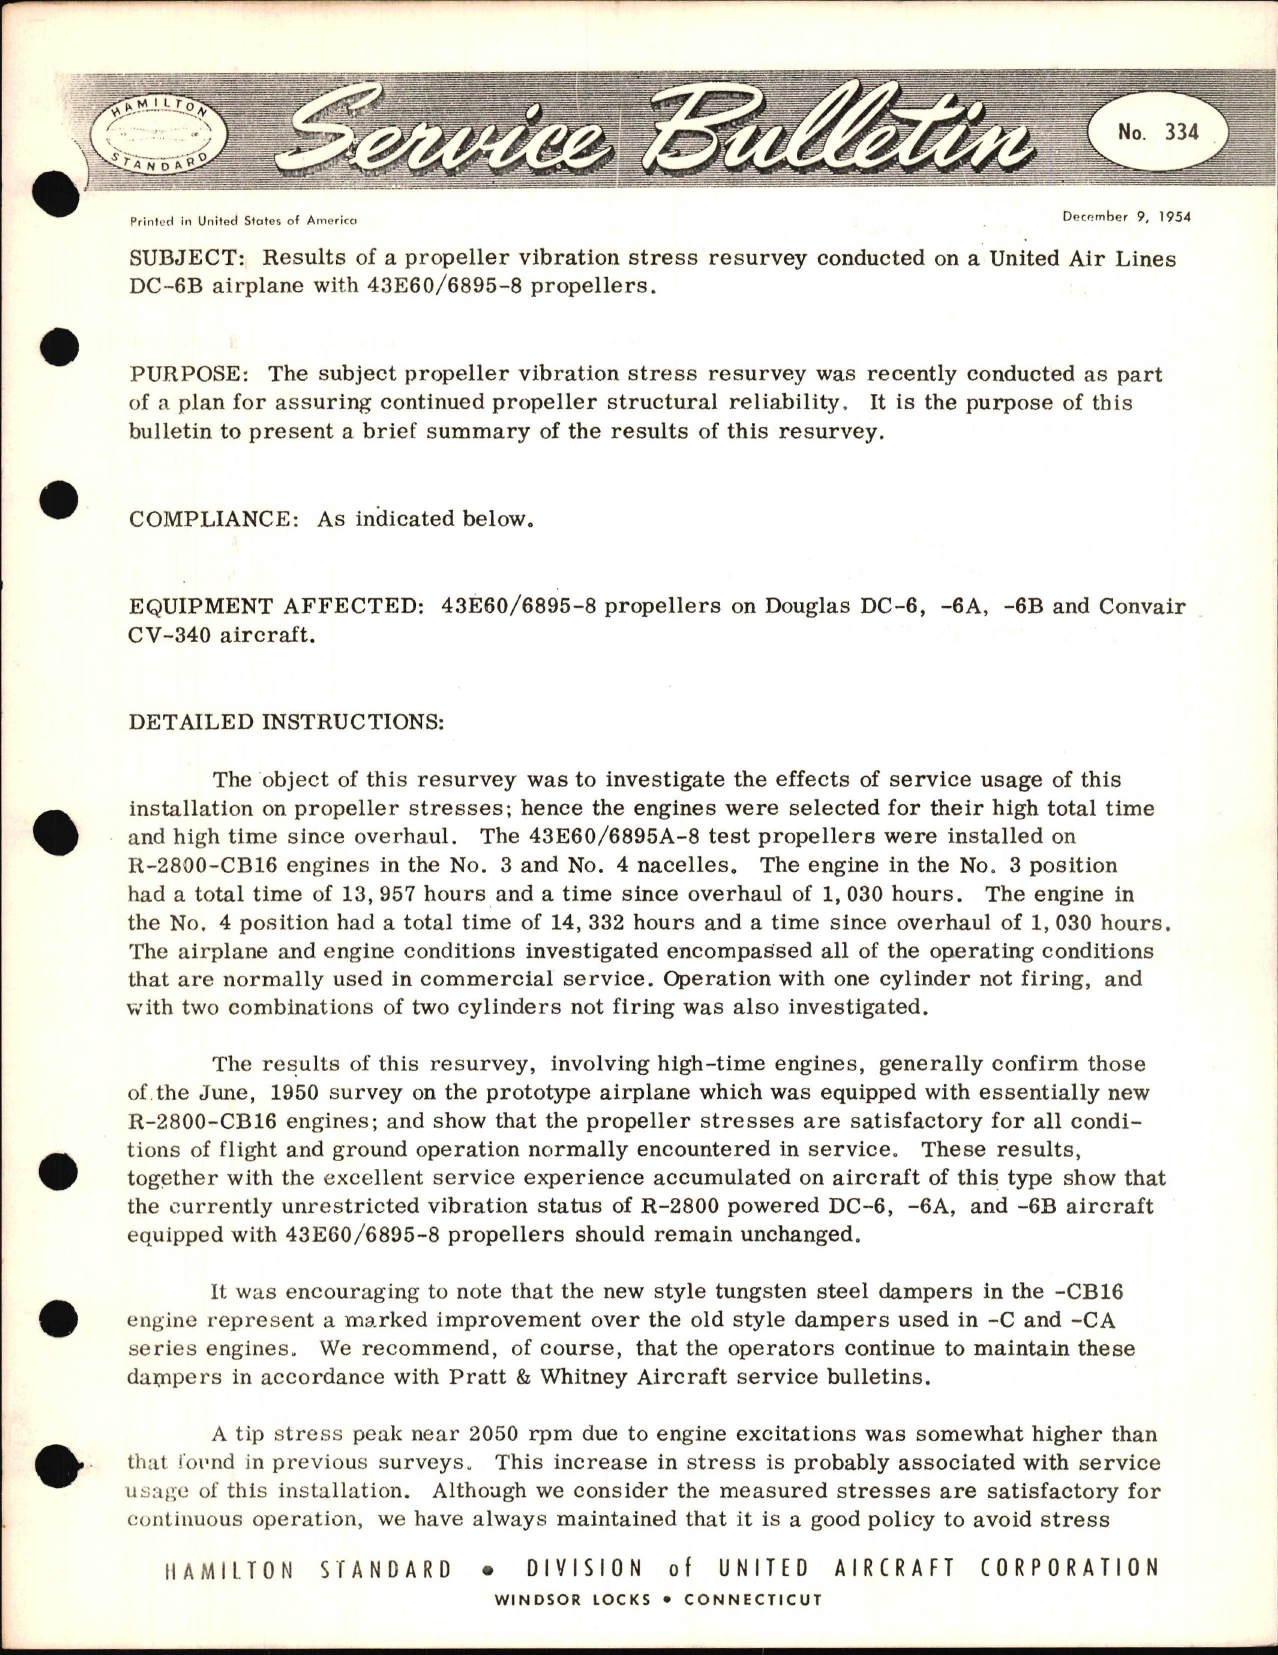 Sample page 1 from AirCorps Library document: Results of a Propeller Vibration Stress Resurvey Conducted on a United Air Lines DC-6B Airplane with 43E60/6895-8 Propellers